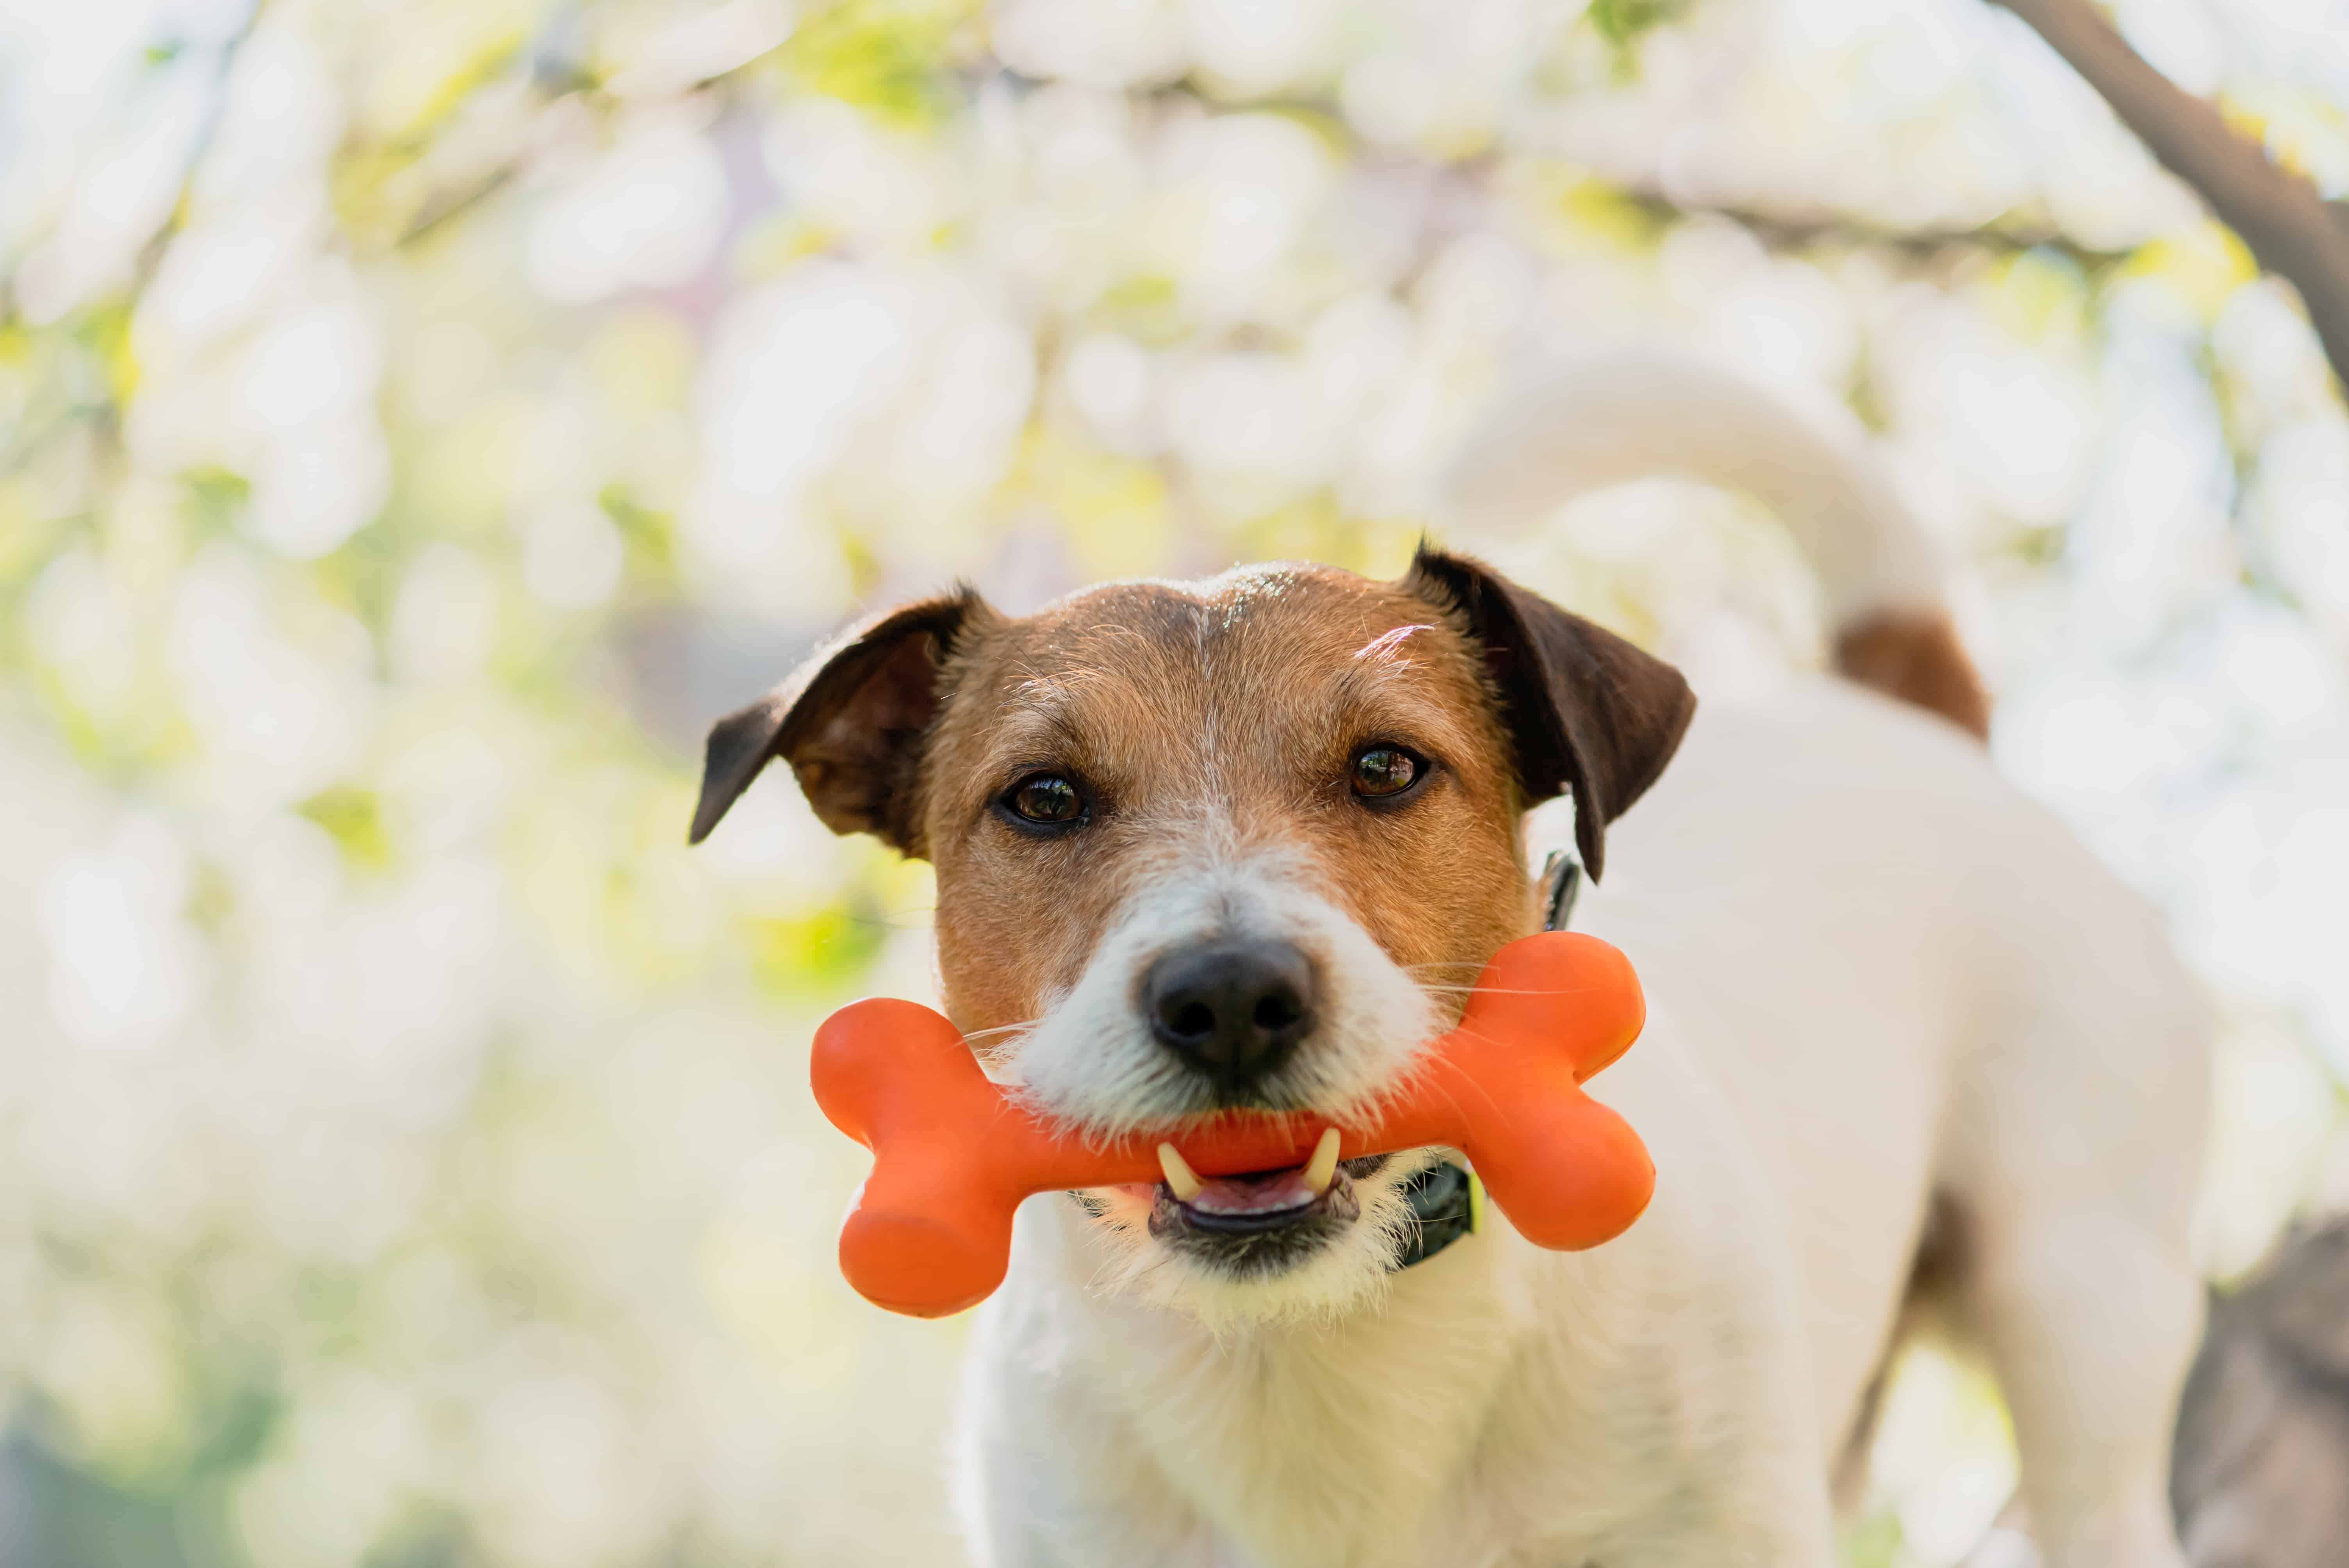 terrier with dog toy in mouth